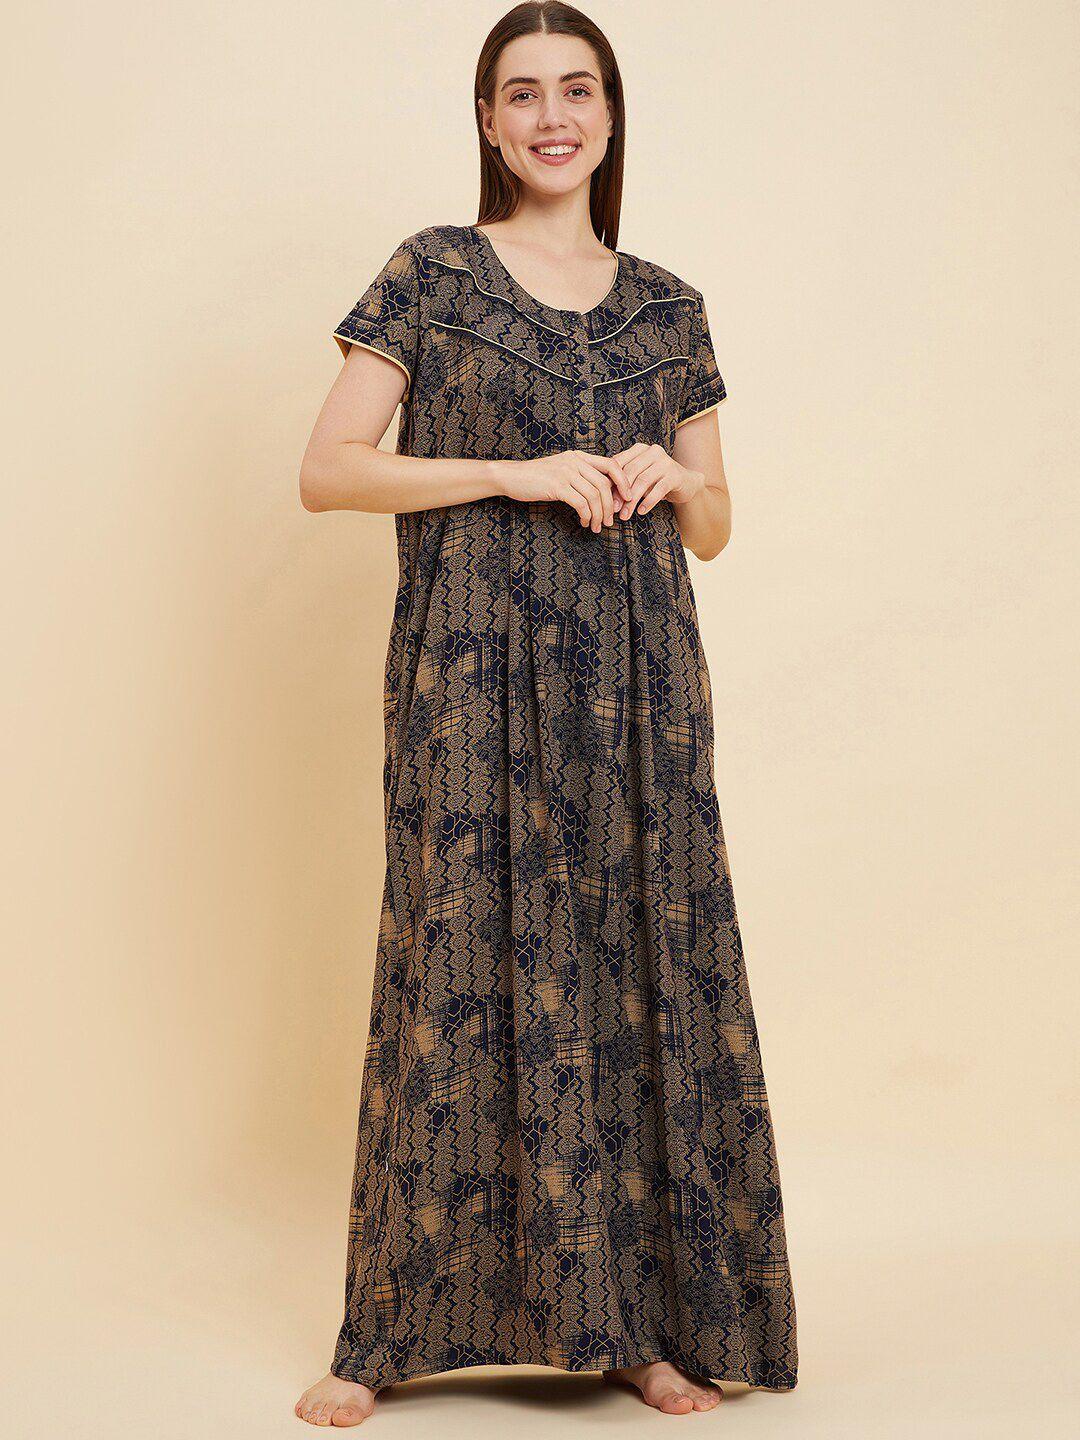 sweet-dreams-navy-blue-and-beige-ethnic-motifs-printed-pure-cotton-maxi-nightdress